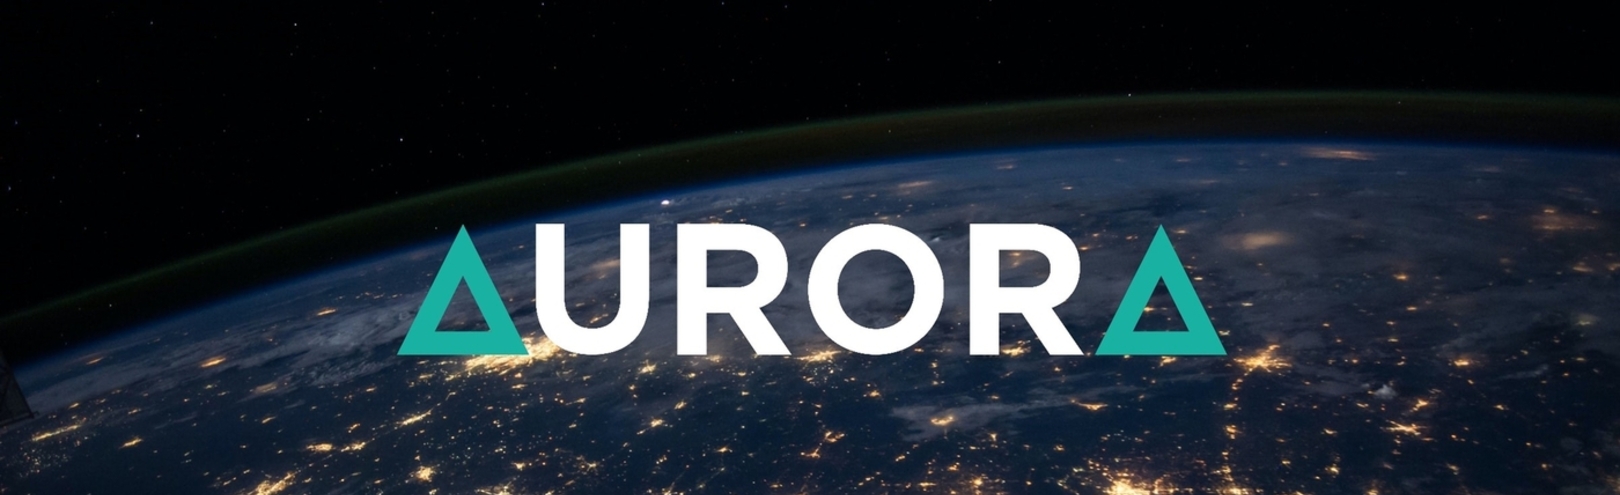 Follow the Aurora Spring Biannual live from Austria - Available at University of Iceland